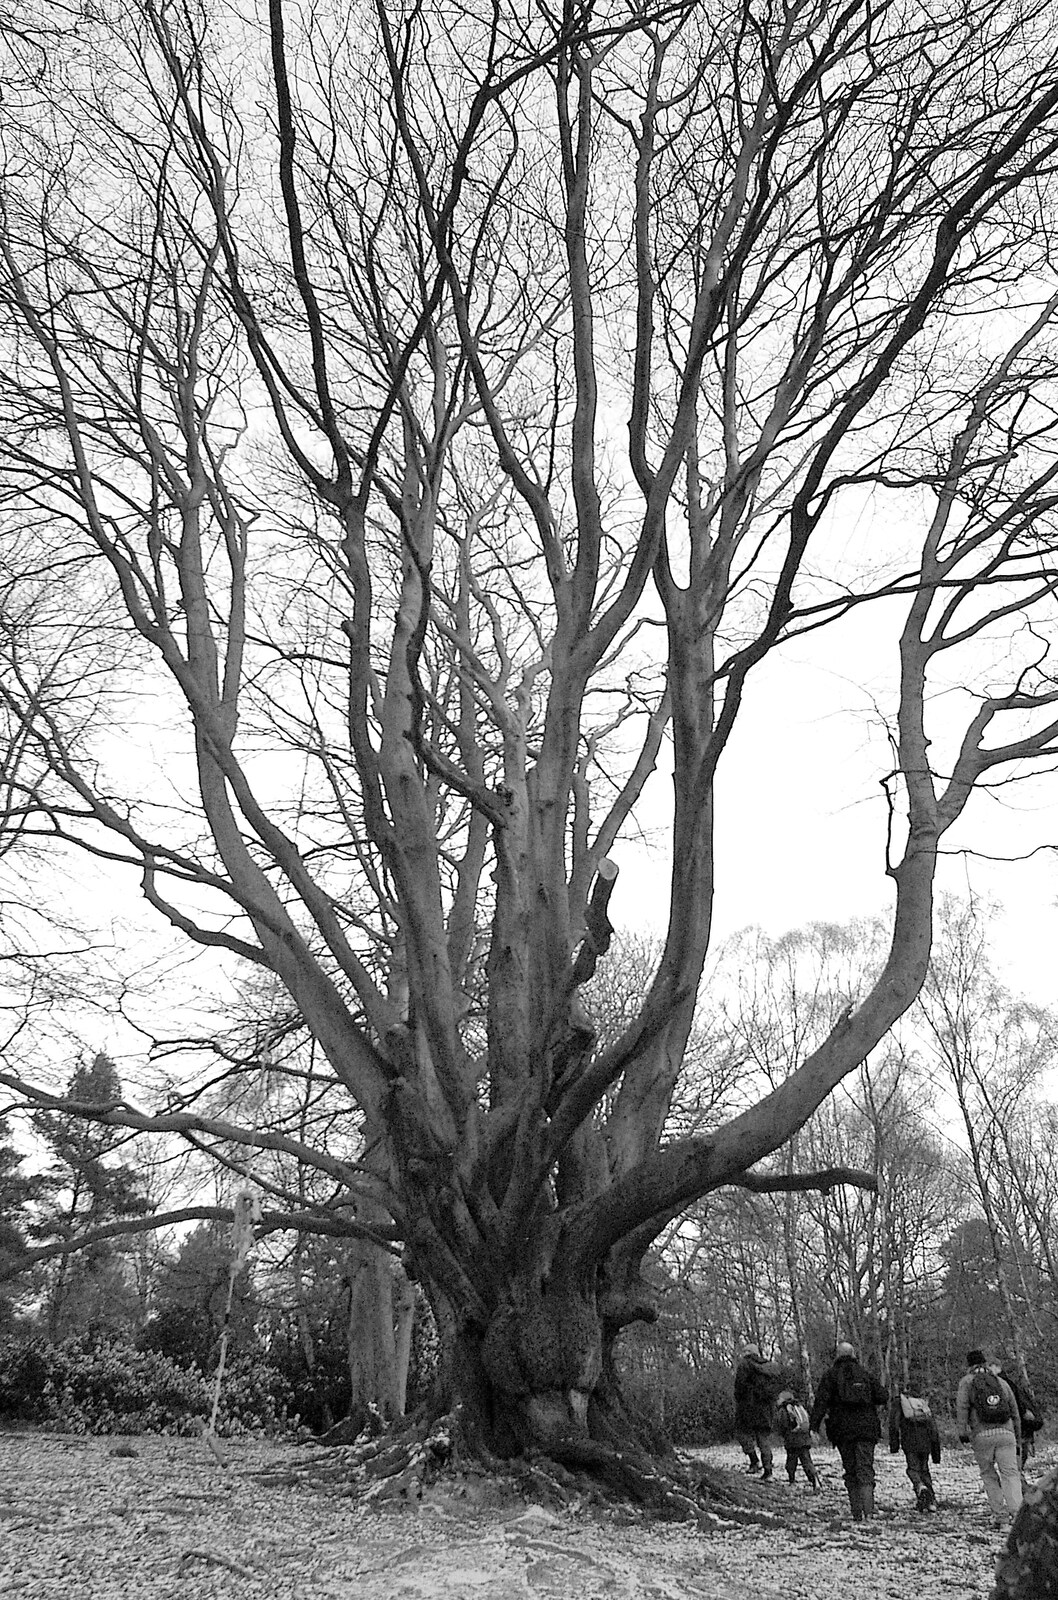 A huge beech tree, pollarded 600 years ago from Walk Like a Shadow: A Day With Ray Mears, Ashdown Forest, East Sussex - 29th December 2005